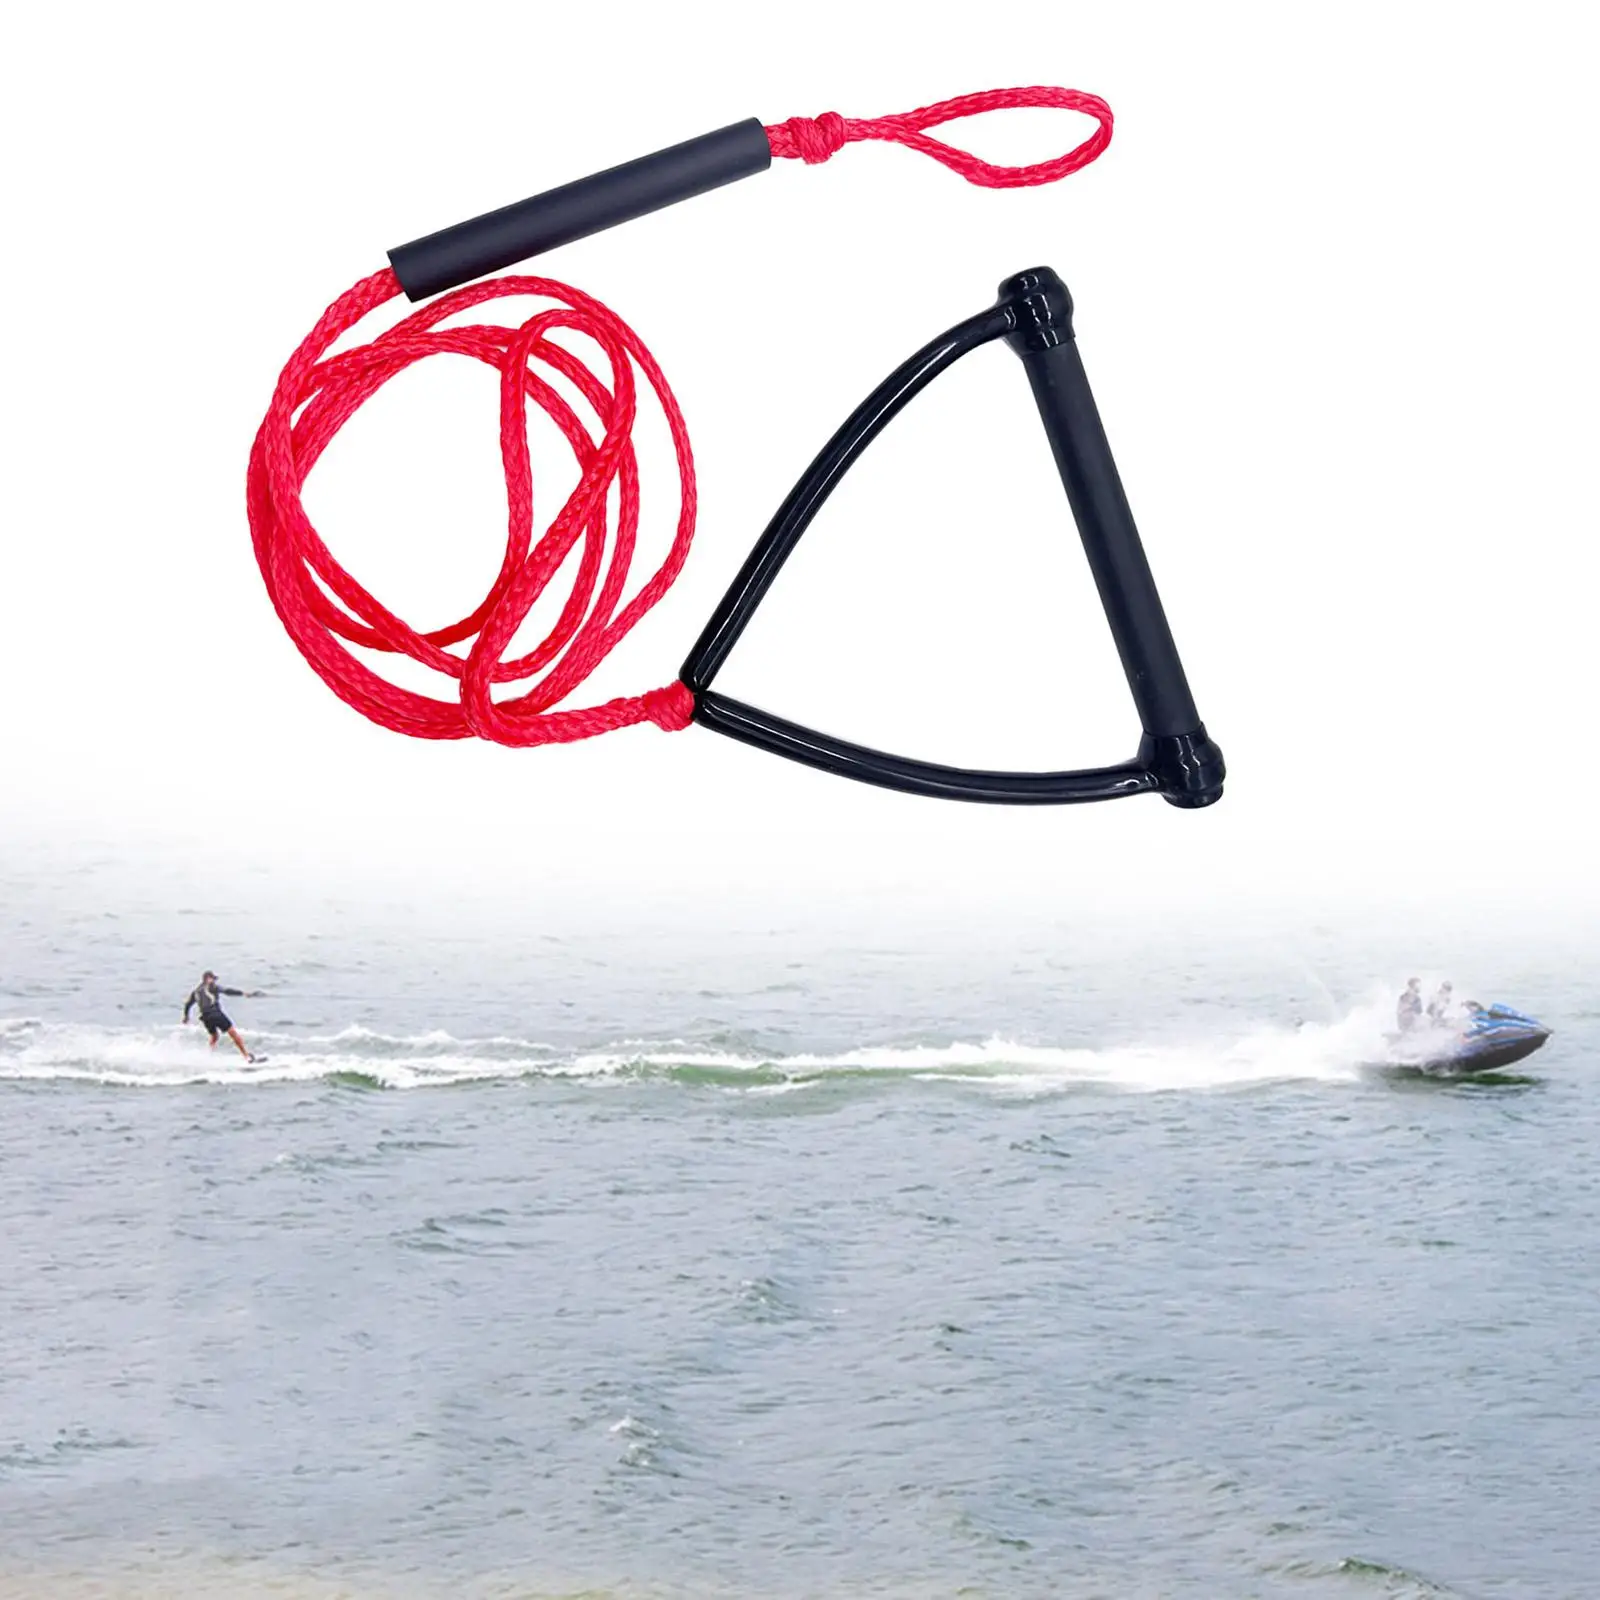 Water Ski Tow Rope with Grip 730cm Multifunctional Portable Boat Surfing Rope Wake Board Water Ski Rope